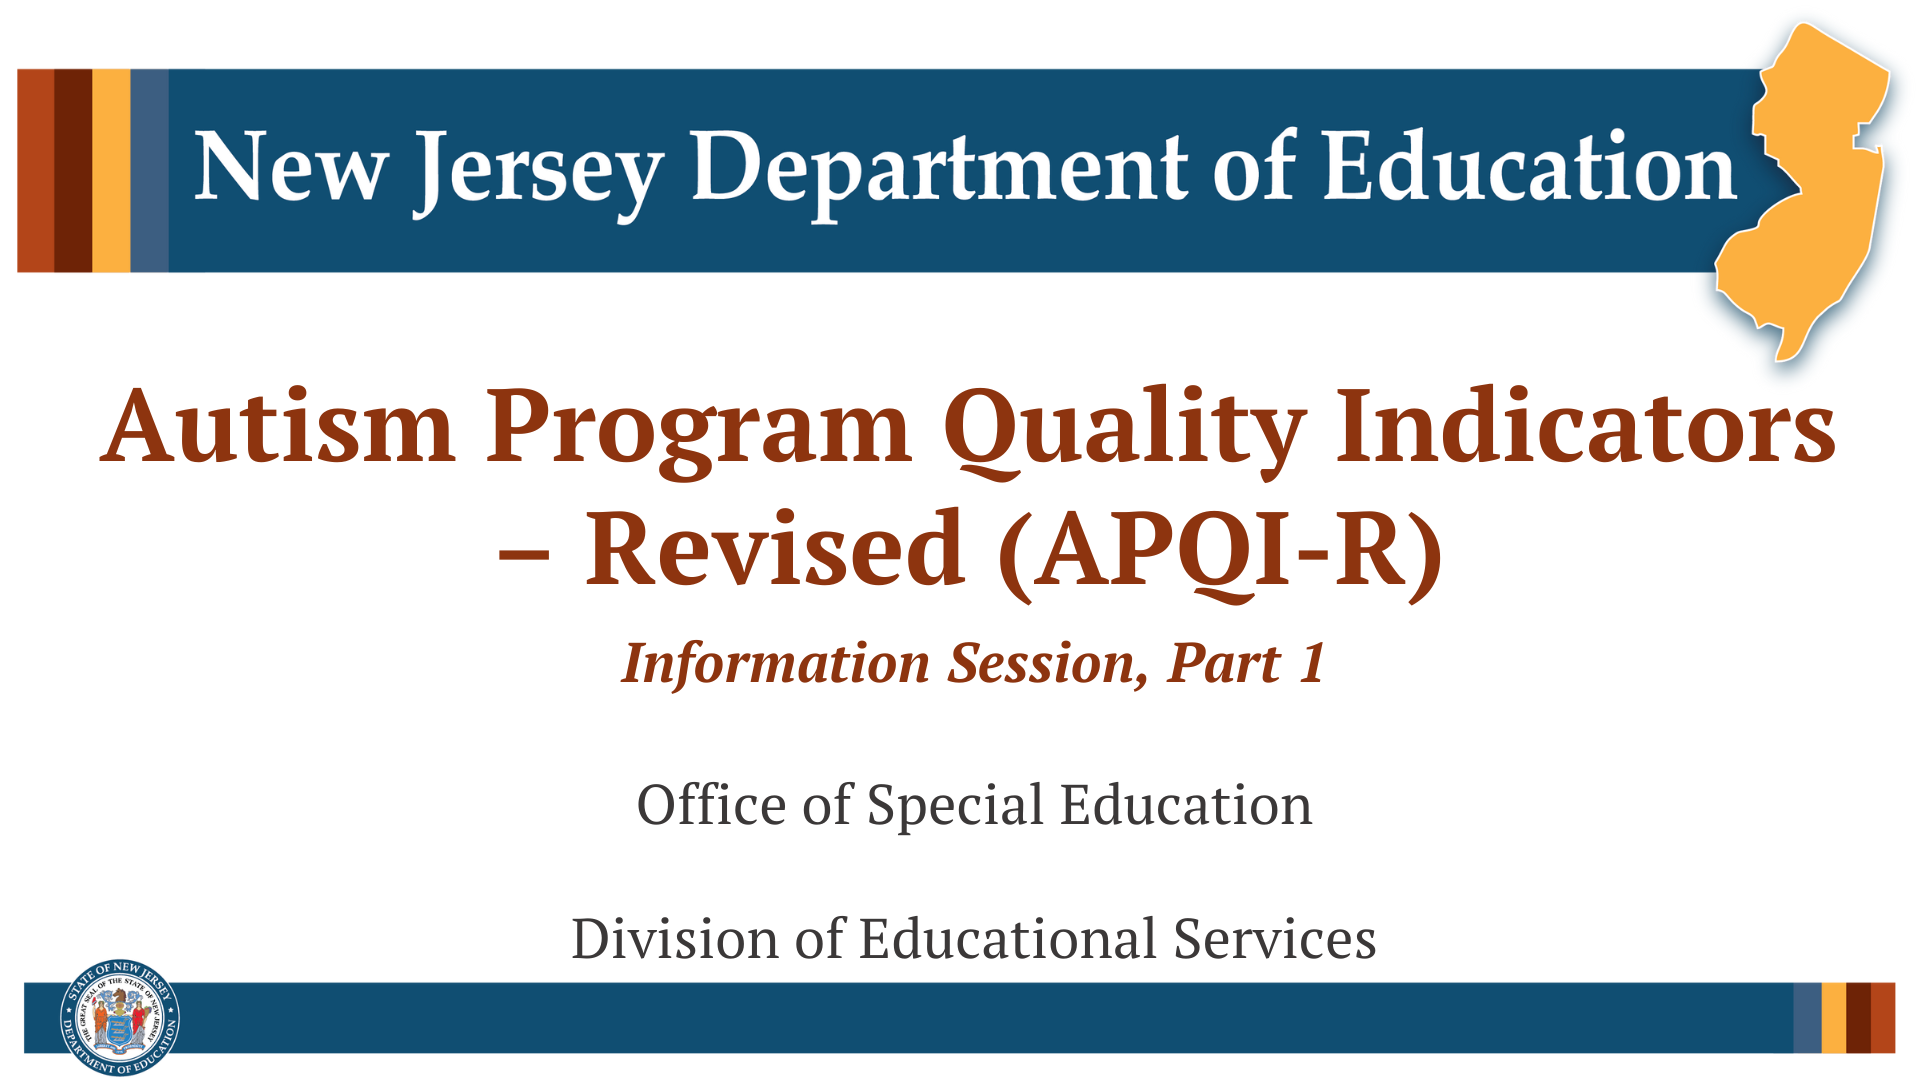 Powerpoint title slide for the autism program quality indicators revised information session